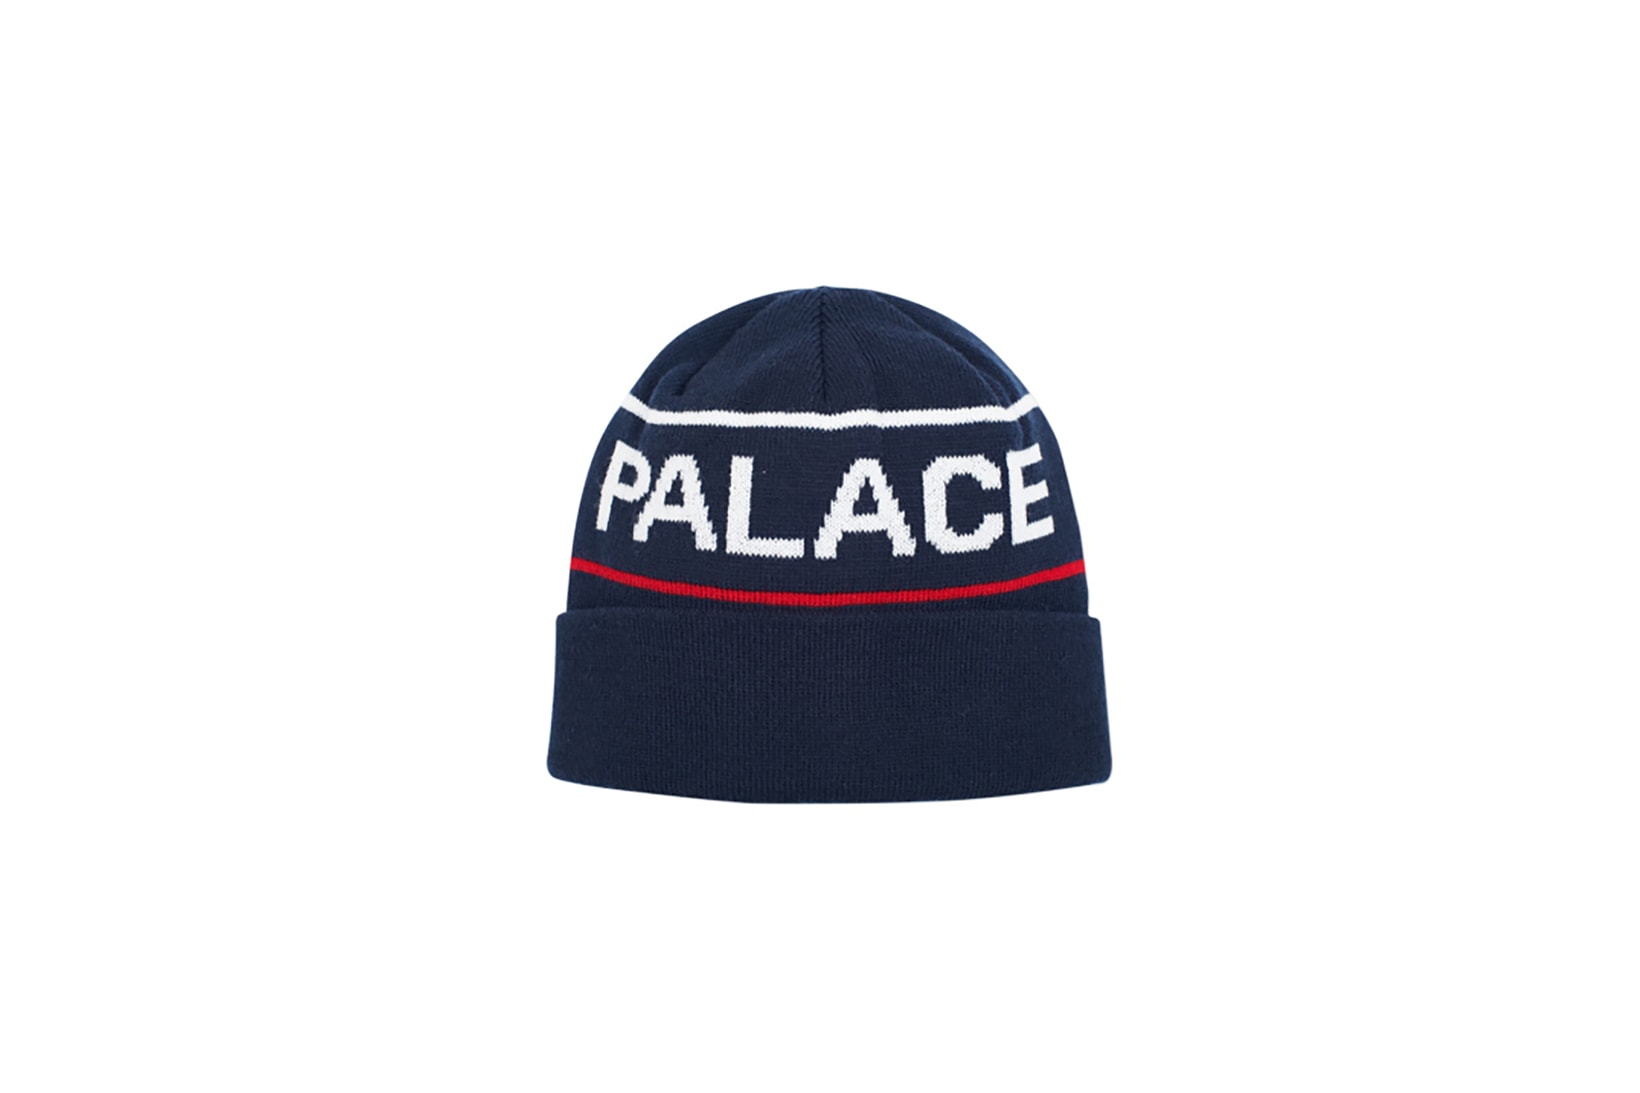 Palace 2017 Autumn Collection